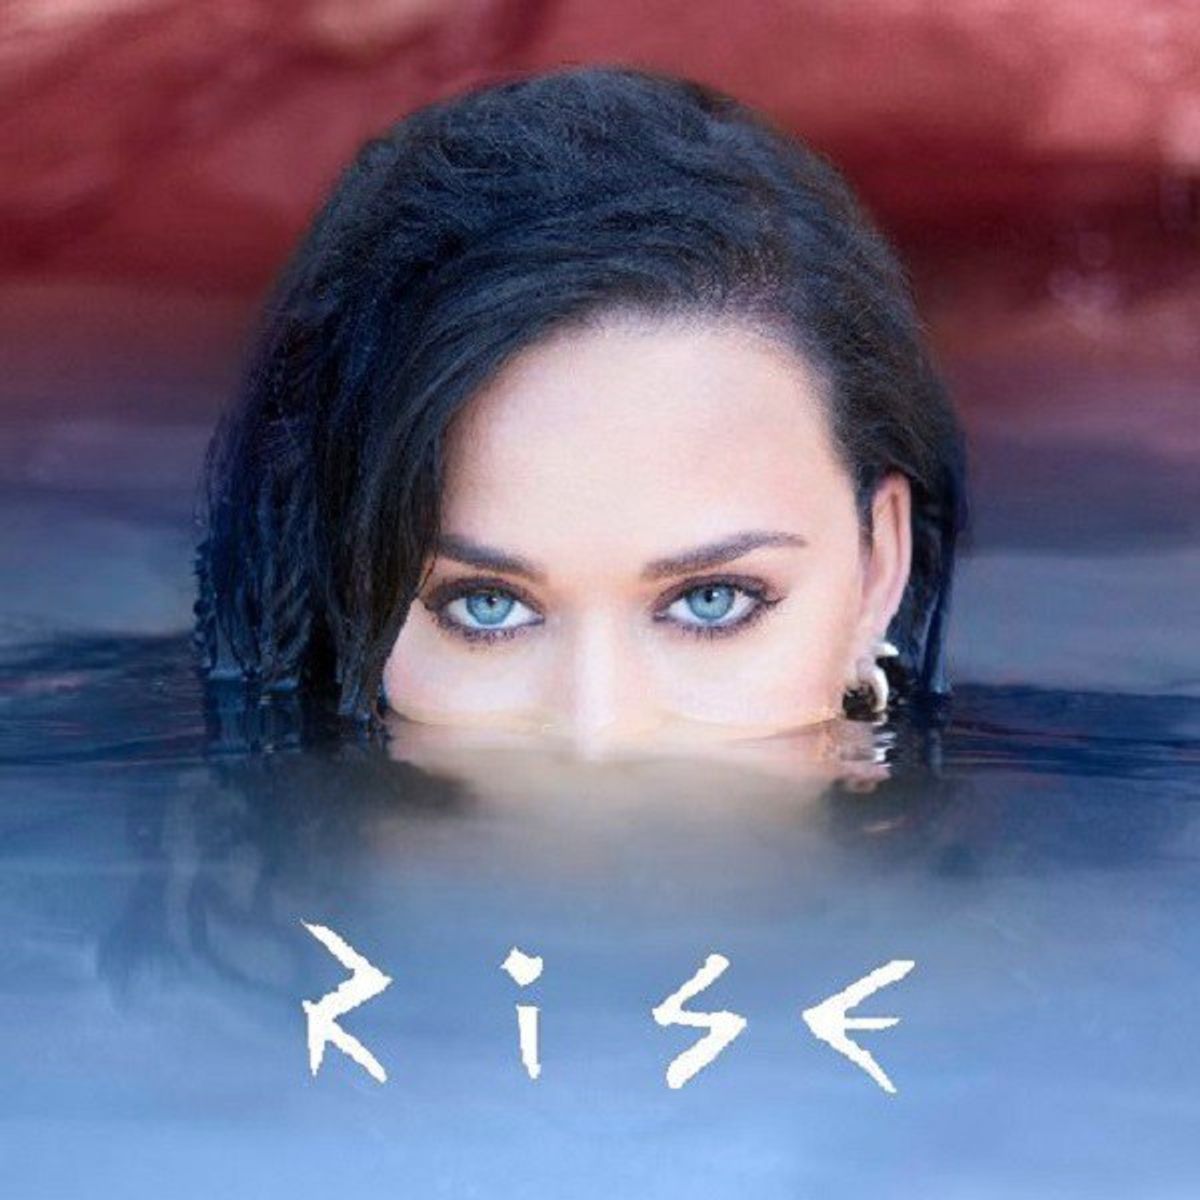 Katy Perry Invites Us All To "Rise" Up Together